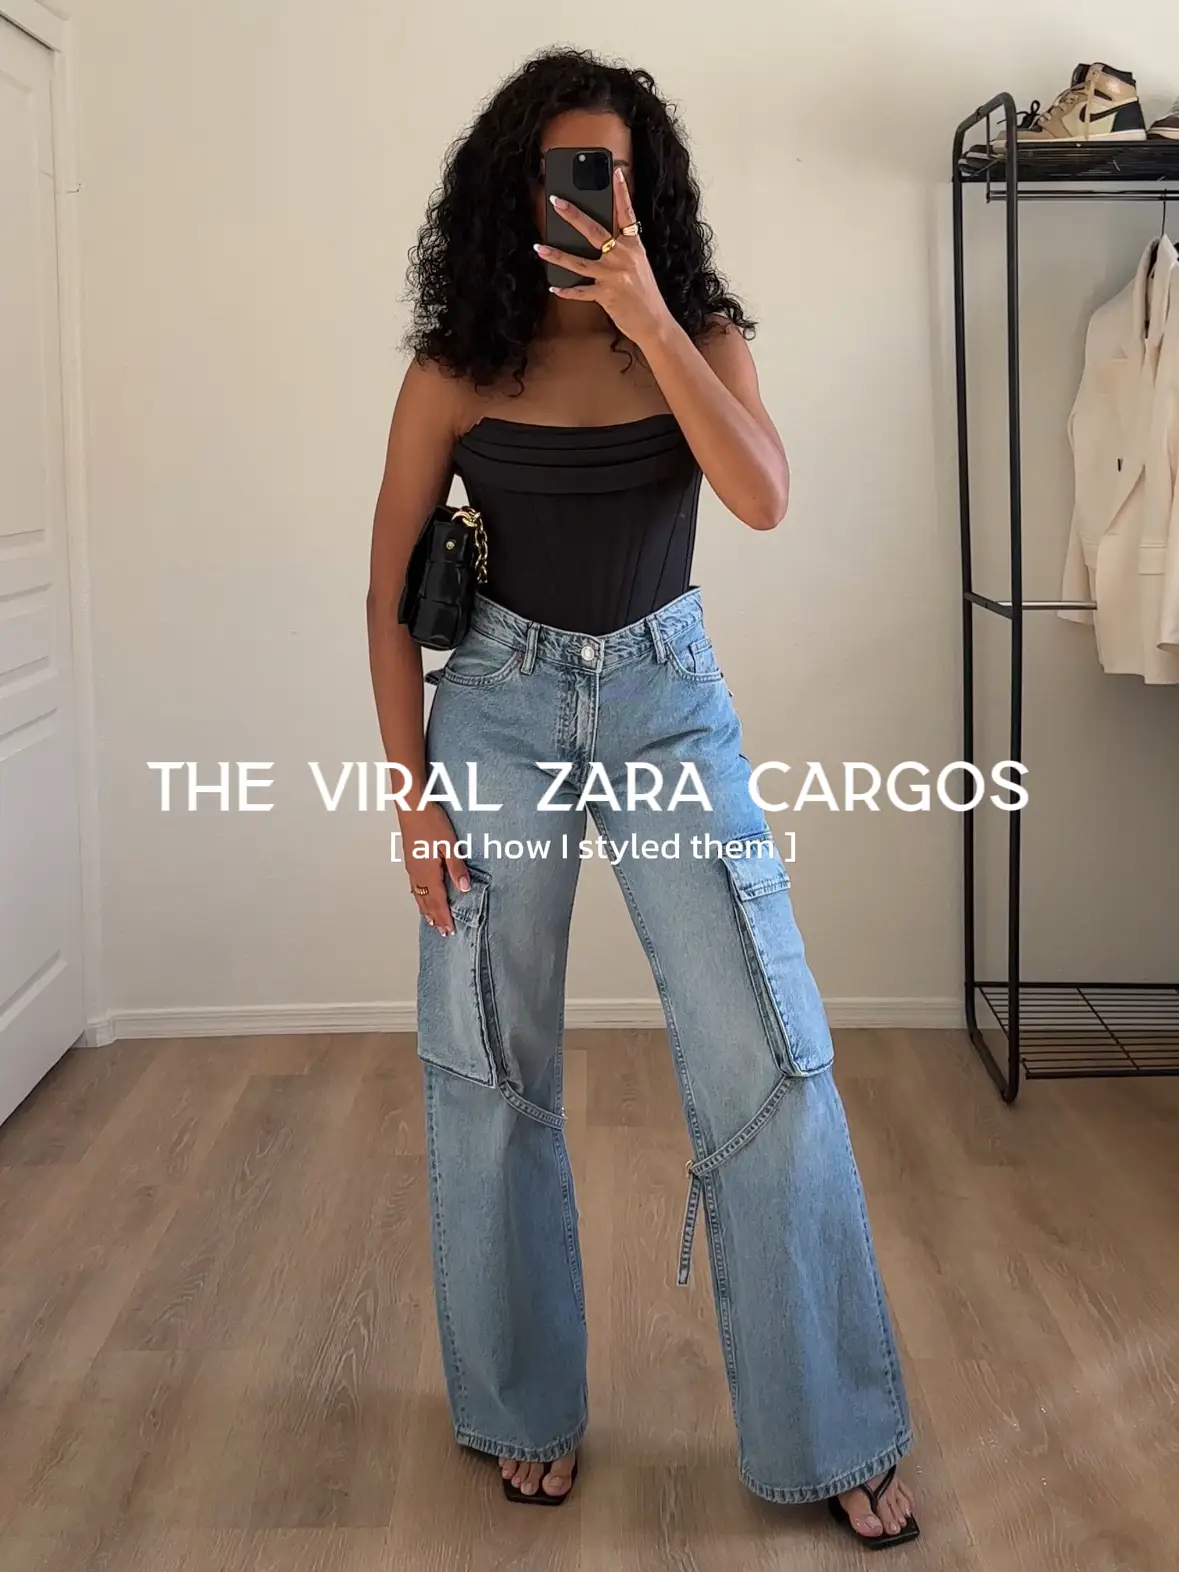 ZARA TROUSERS ~ BEST Essential Basics Try on Pant Review #zara #style # fashion 